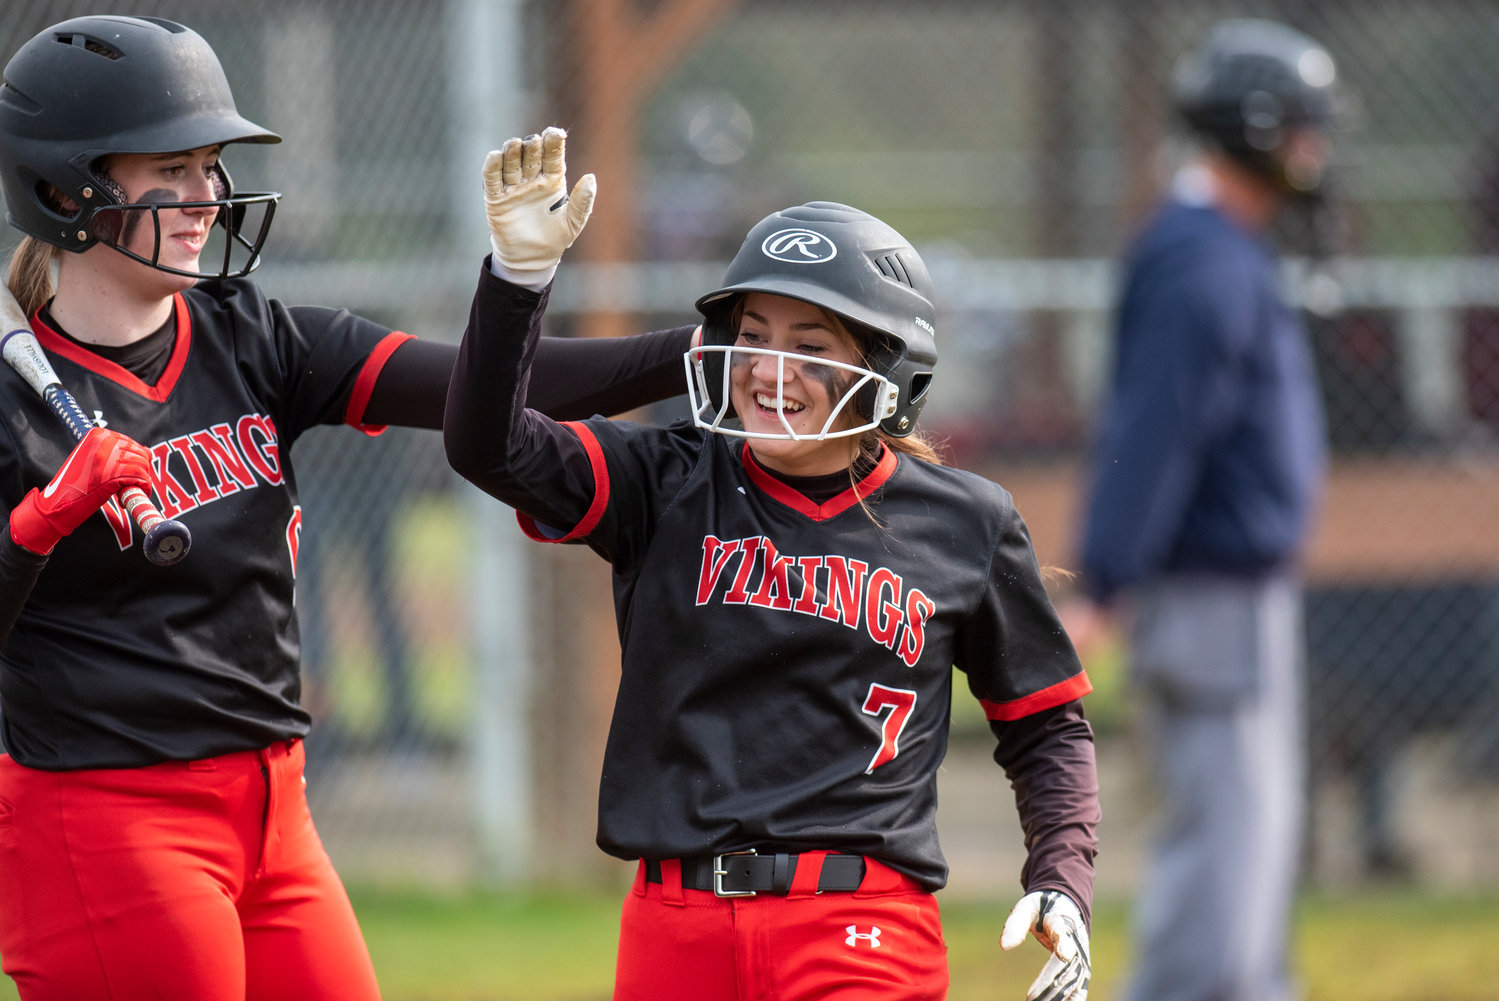 Mossyrock's Jolee Hadaller, left, congratulates Lois Stone (7) after Stone scored a run against Oakville during a game in Chehalis Village on April 28.